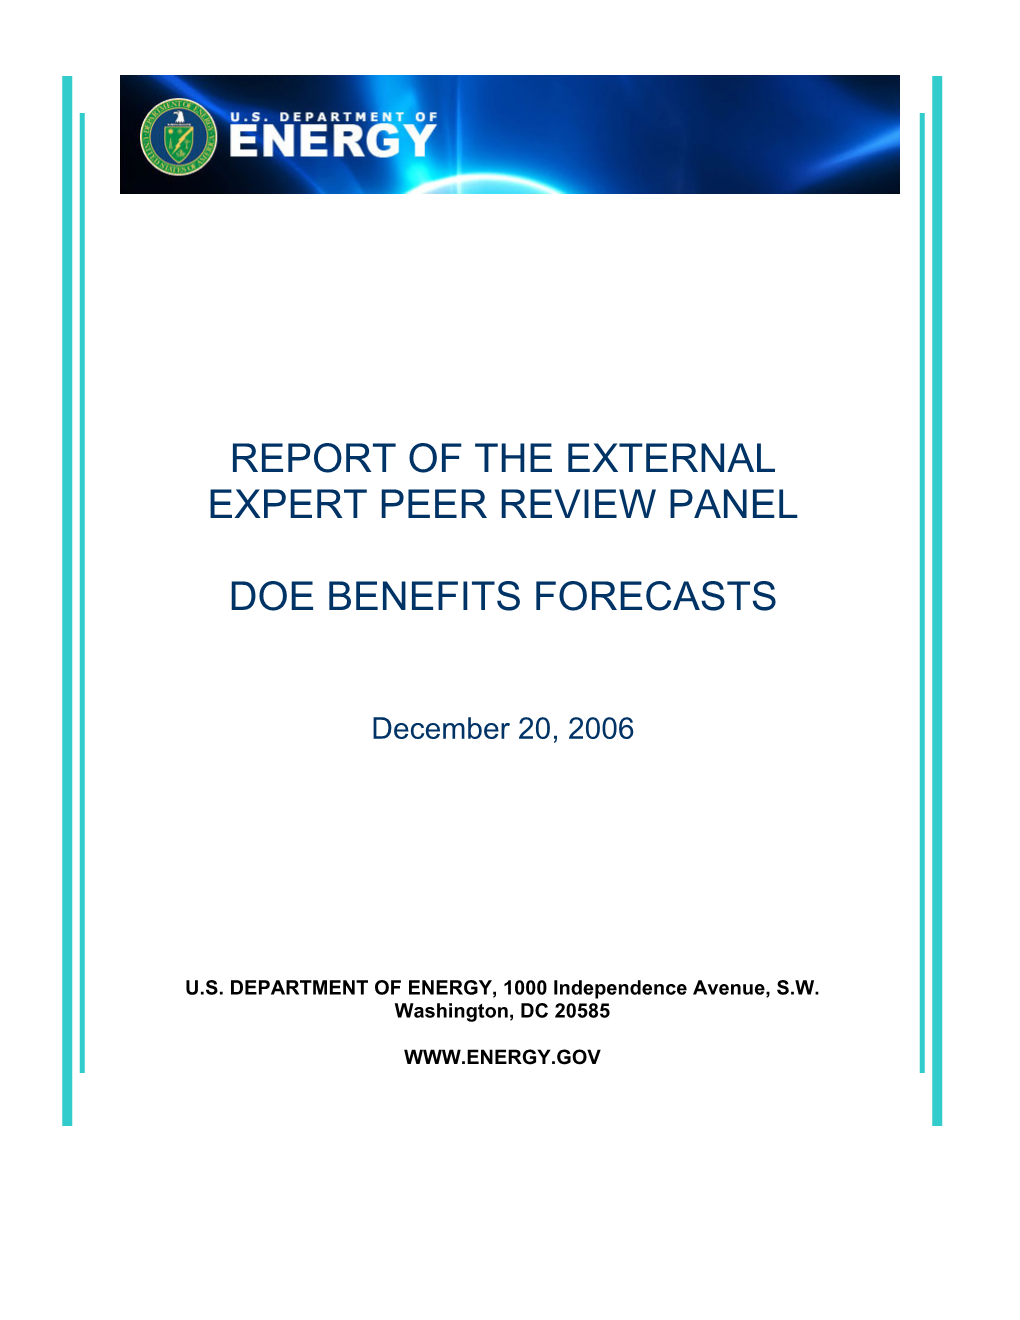 Report of the External Expert Peer Review Panel: DOE Benefits Forecasts